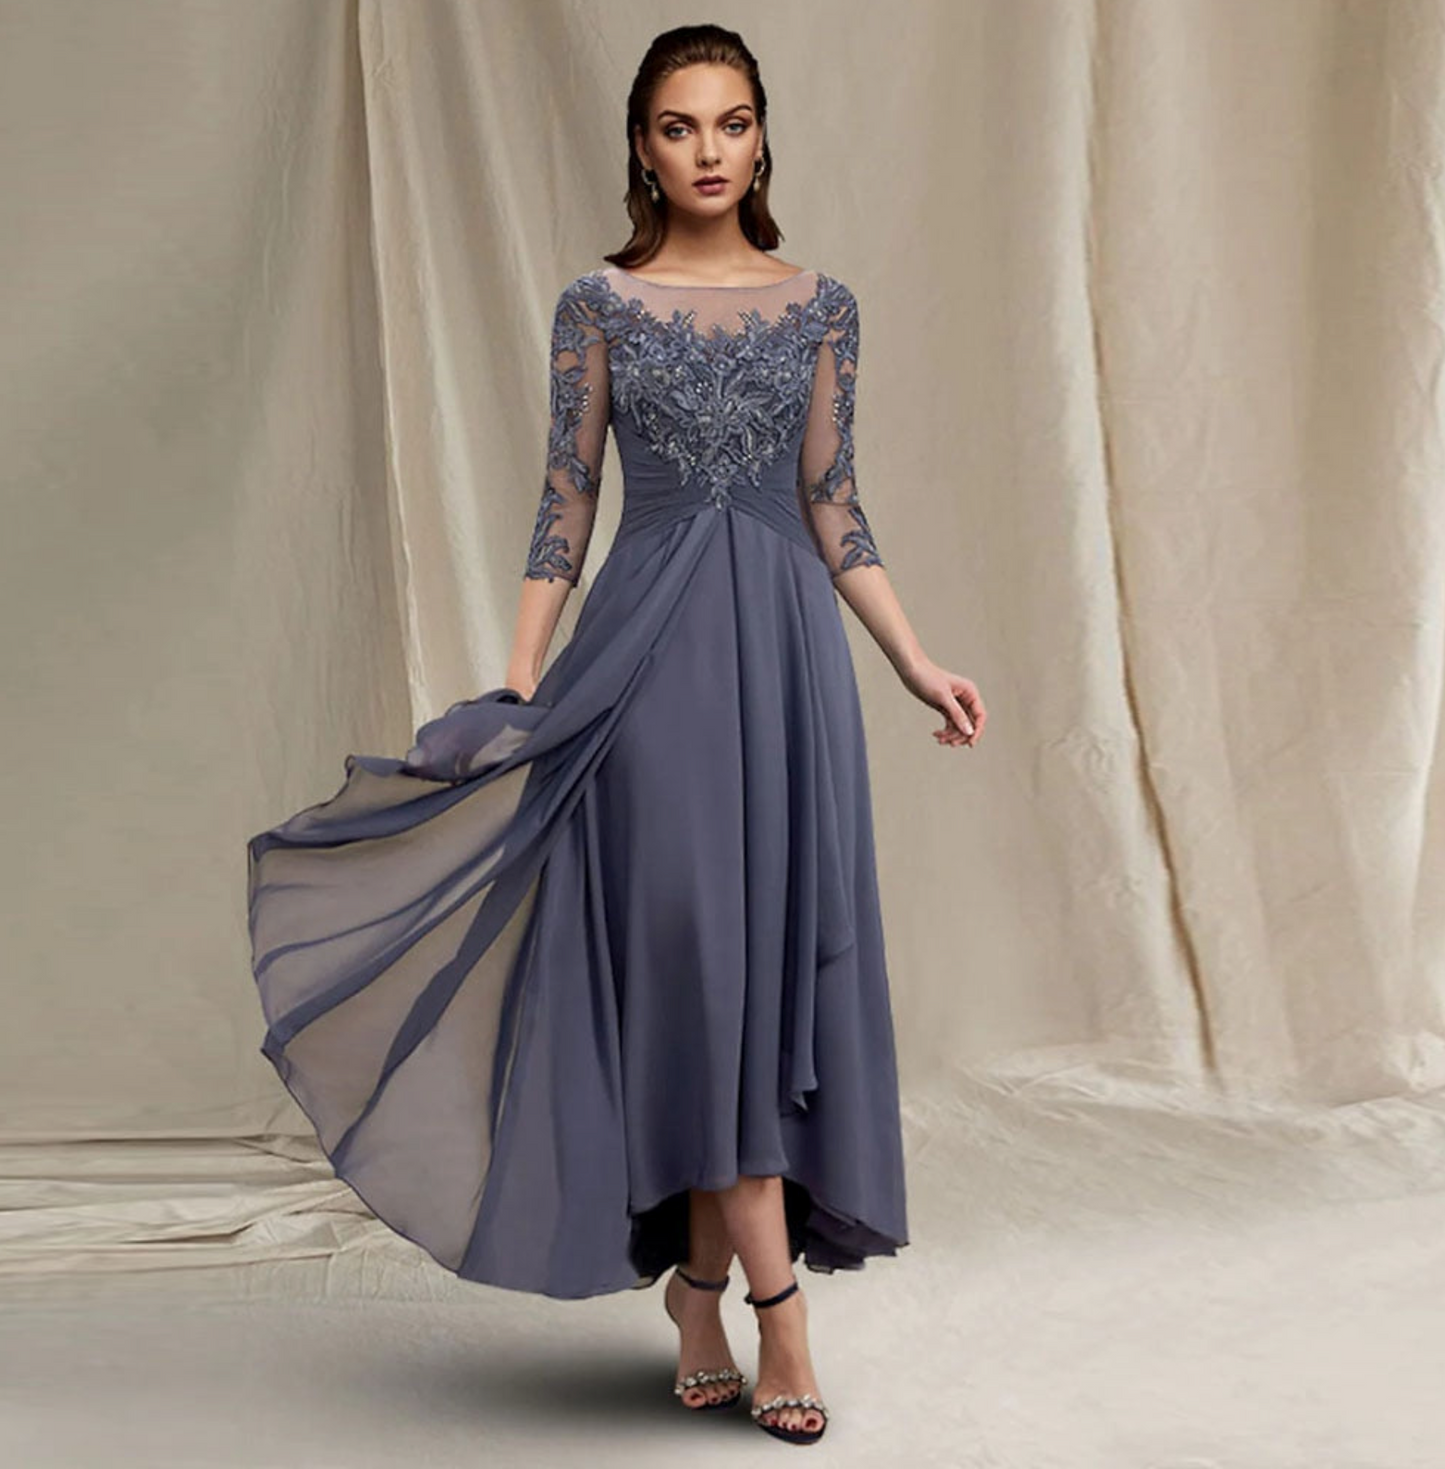 Chiffon Mother of the Bride Dress Lace A-Line Wedding Tea-Length Gown –  TulleLux Bridal Crowns & Accessories